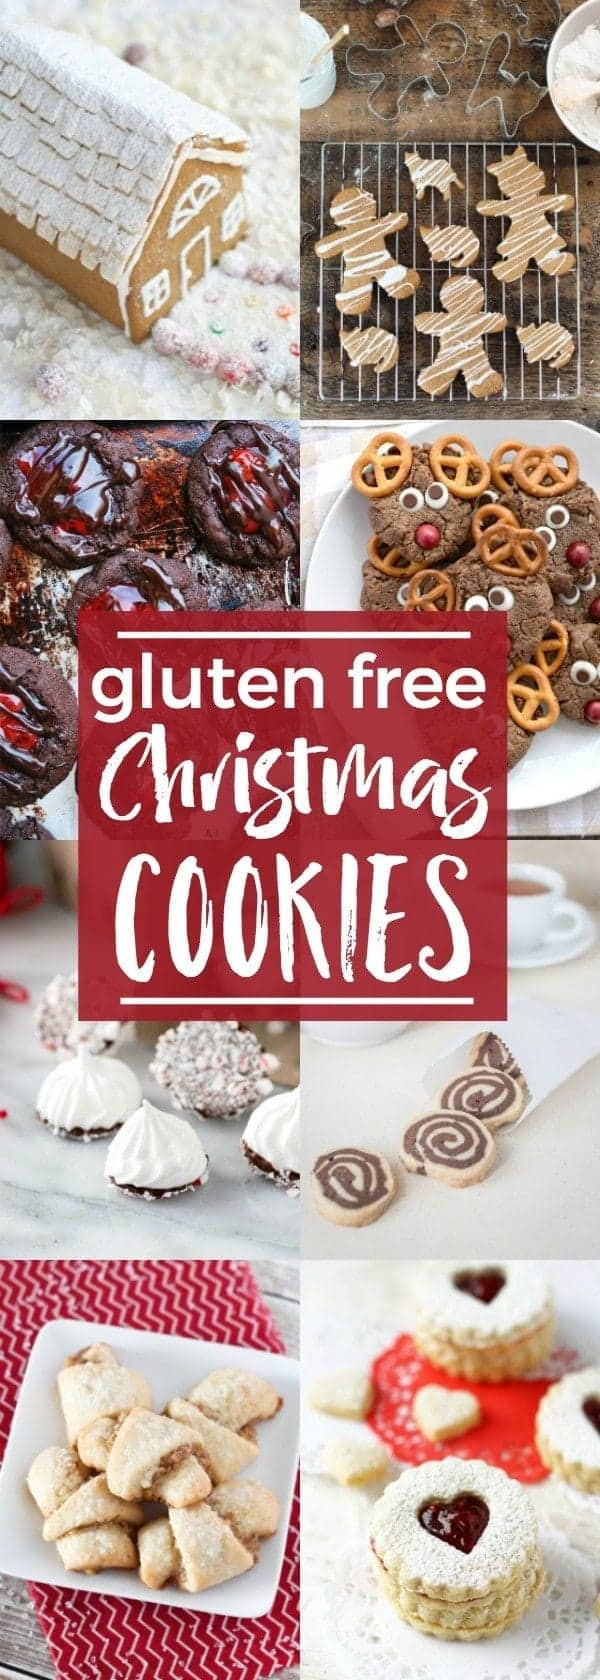 Christmas Cookies List
 Gluten Free Christmas Cookies What the Fork